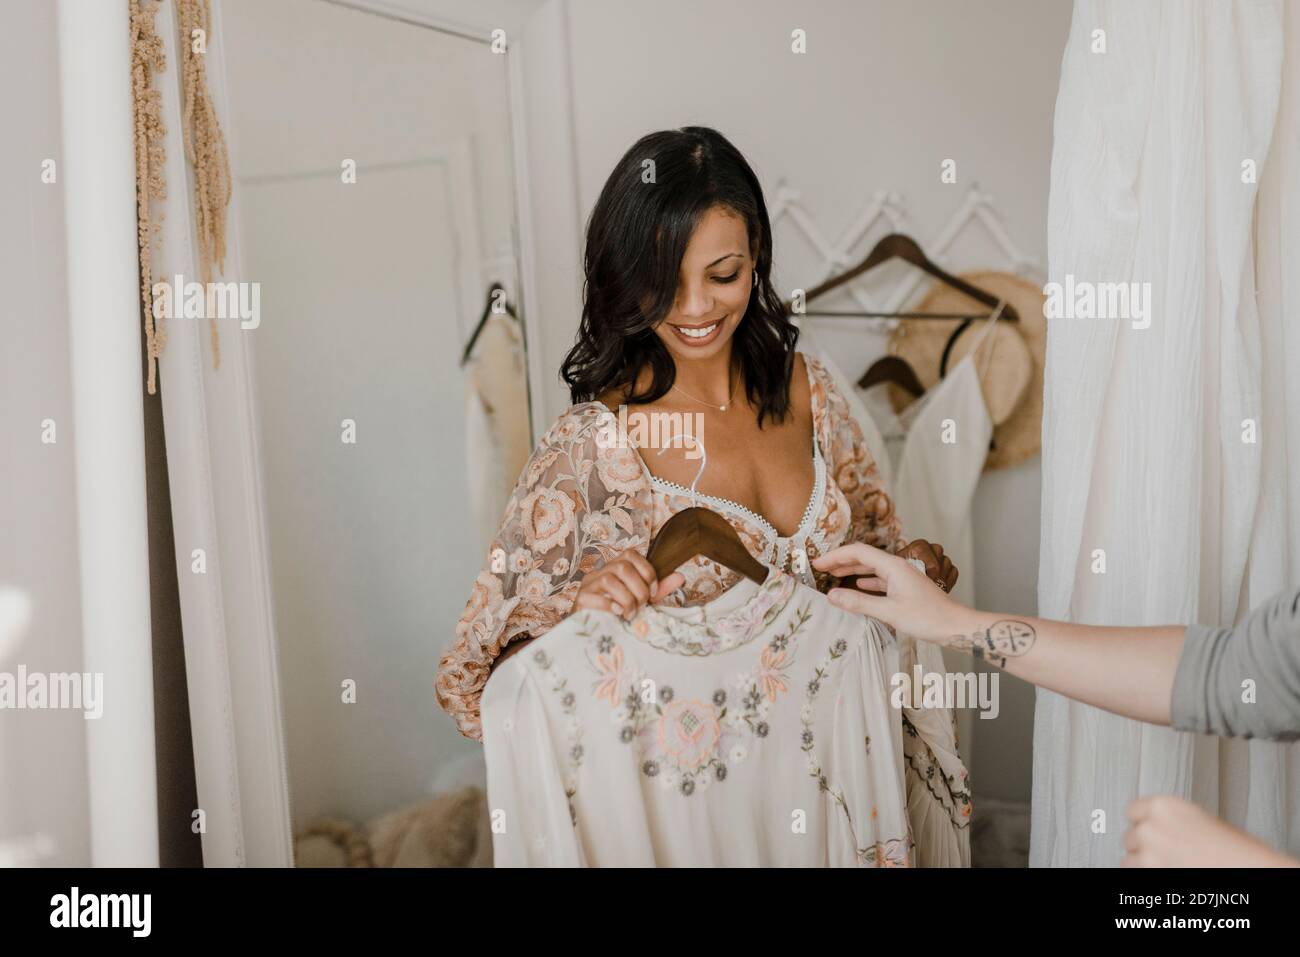 Cropped image of friend's hand trying new dress on bride at wedding dress shop Stock Photo